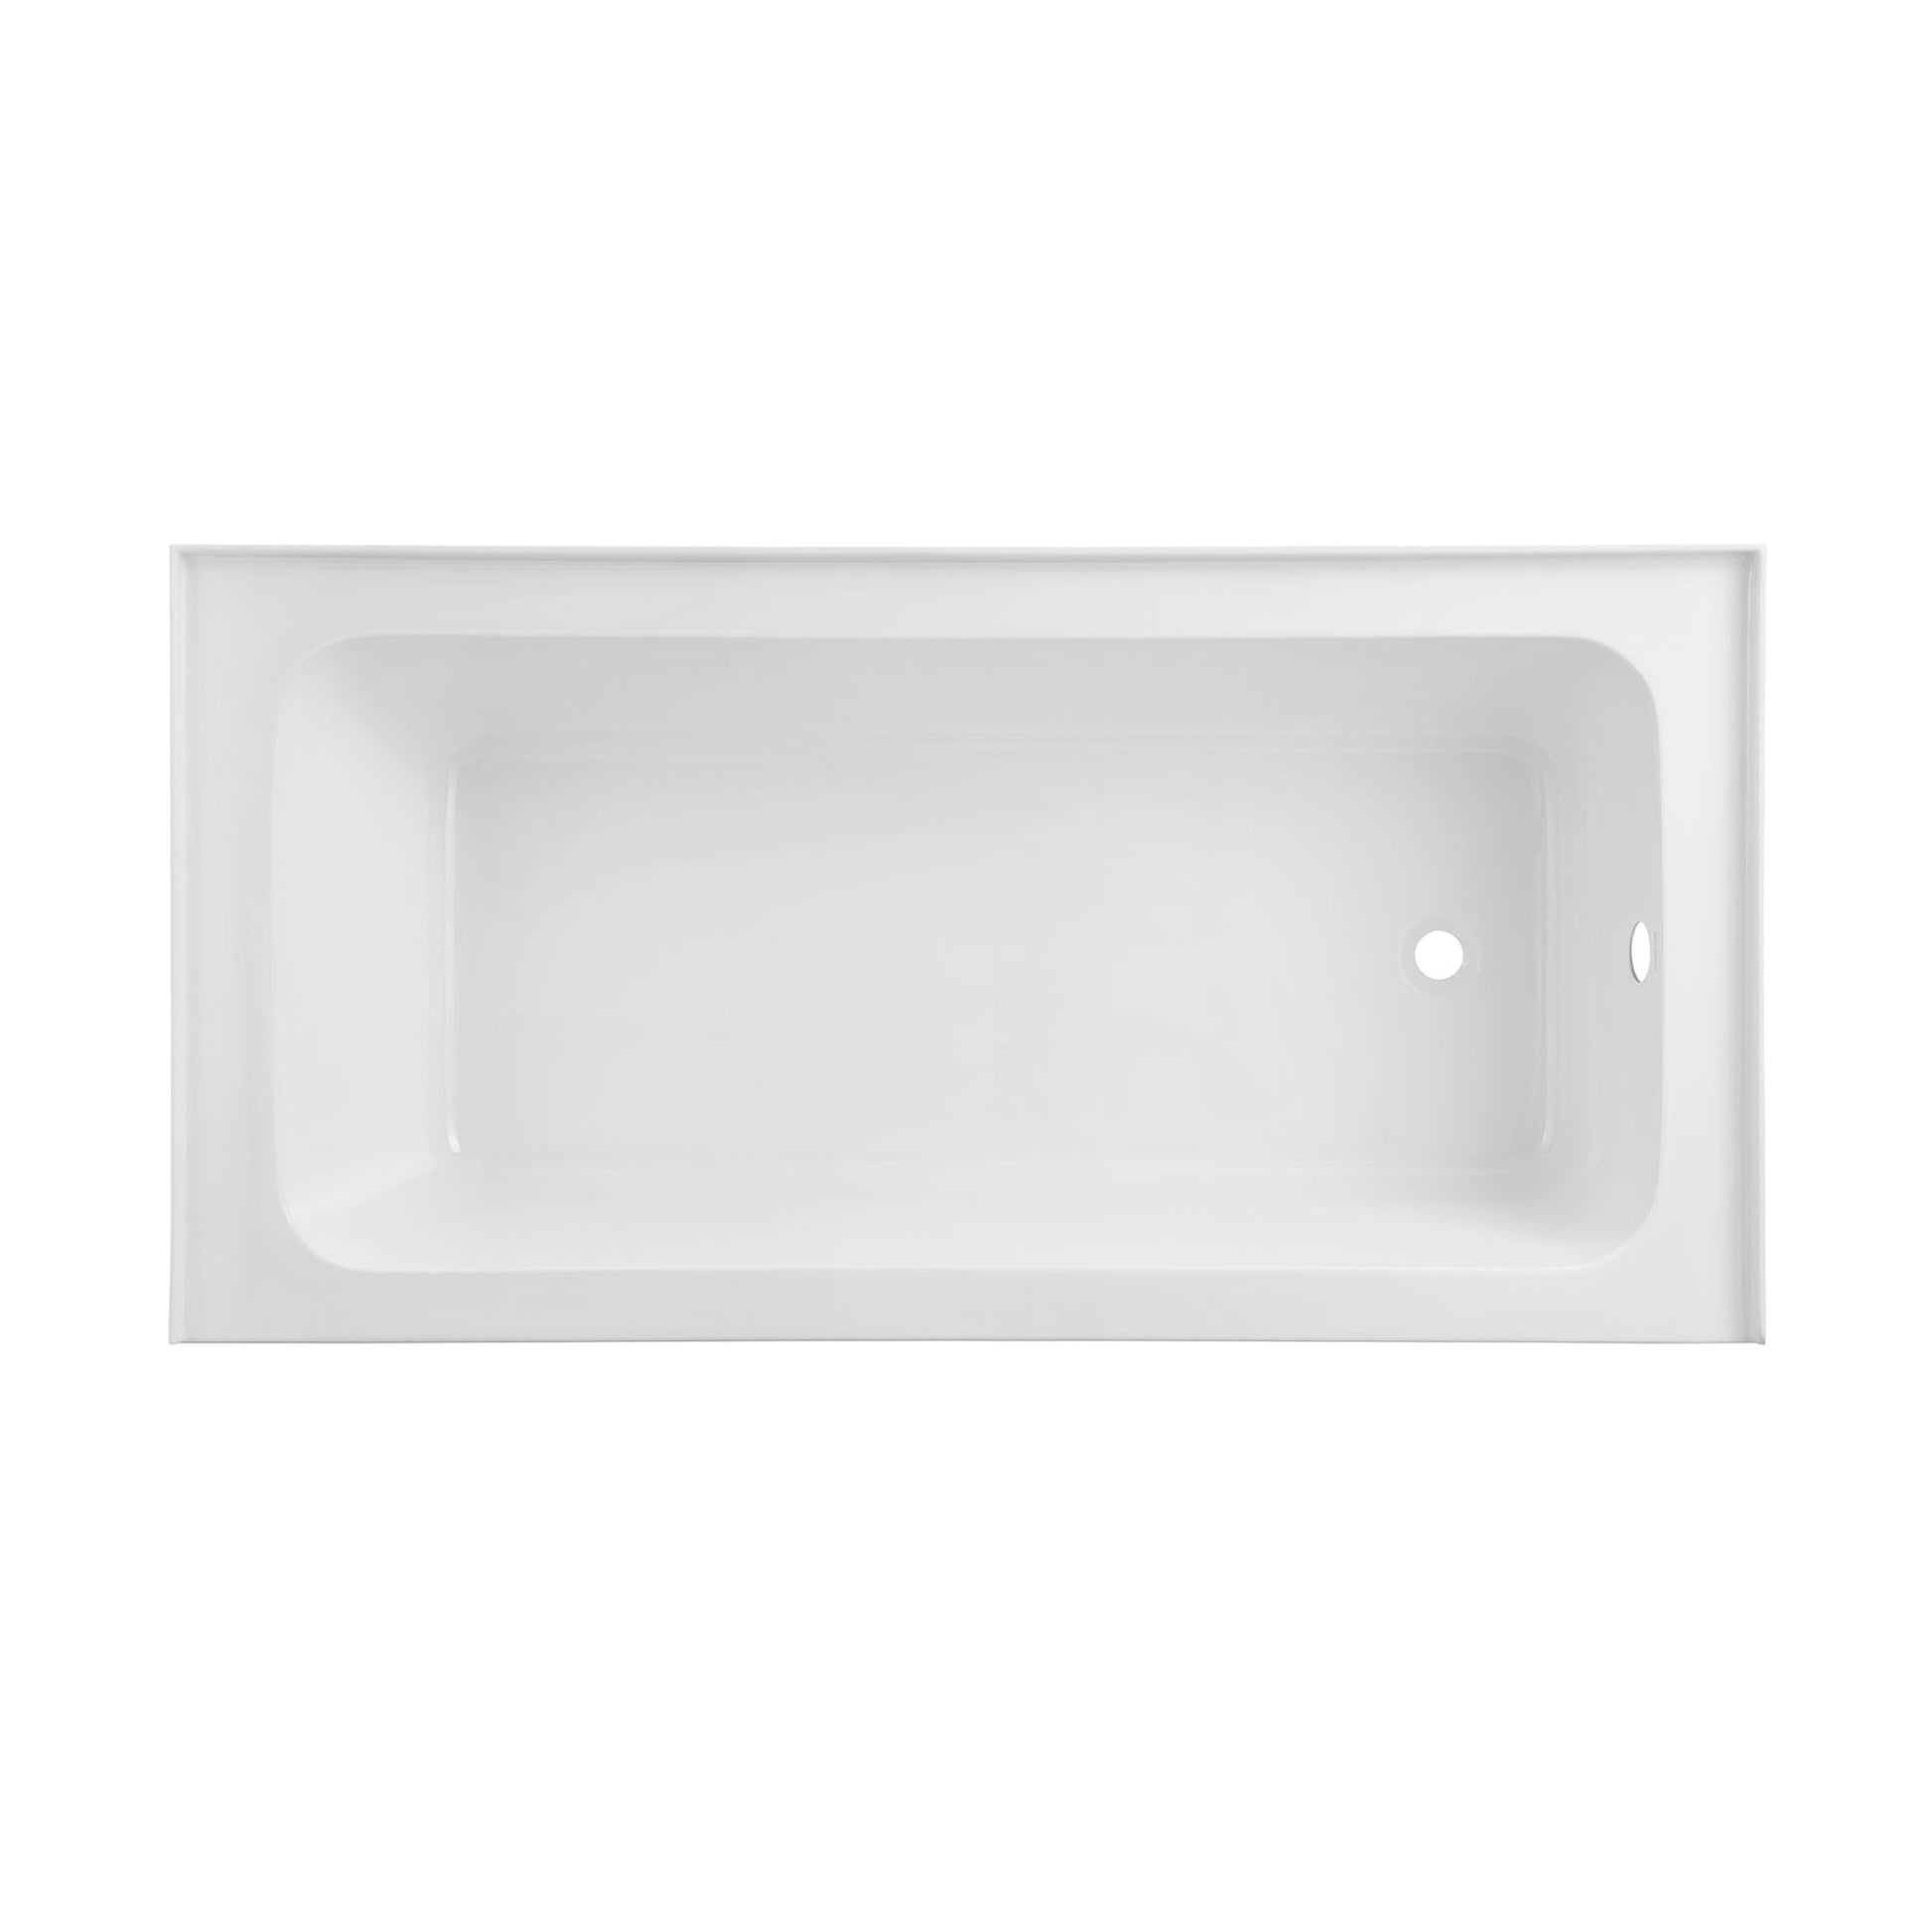 Swiss Madison Virage 60" x 30" White Right-Hand Drain Alcove Bathtub With Built-In Flange & Sleek Apron Front